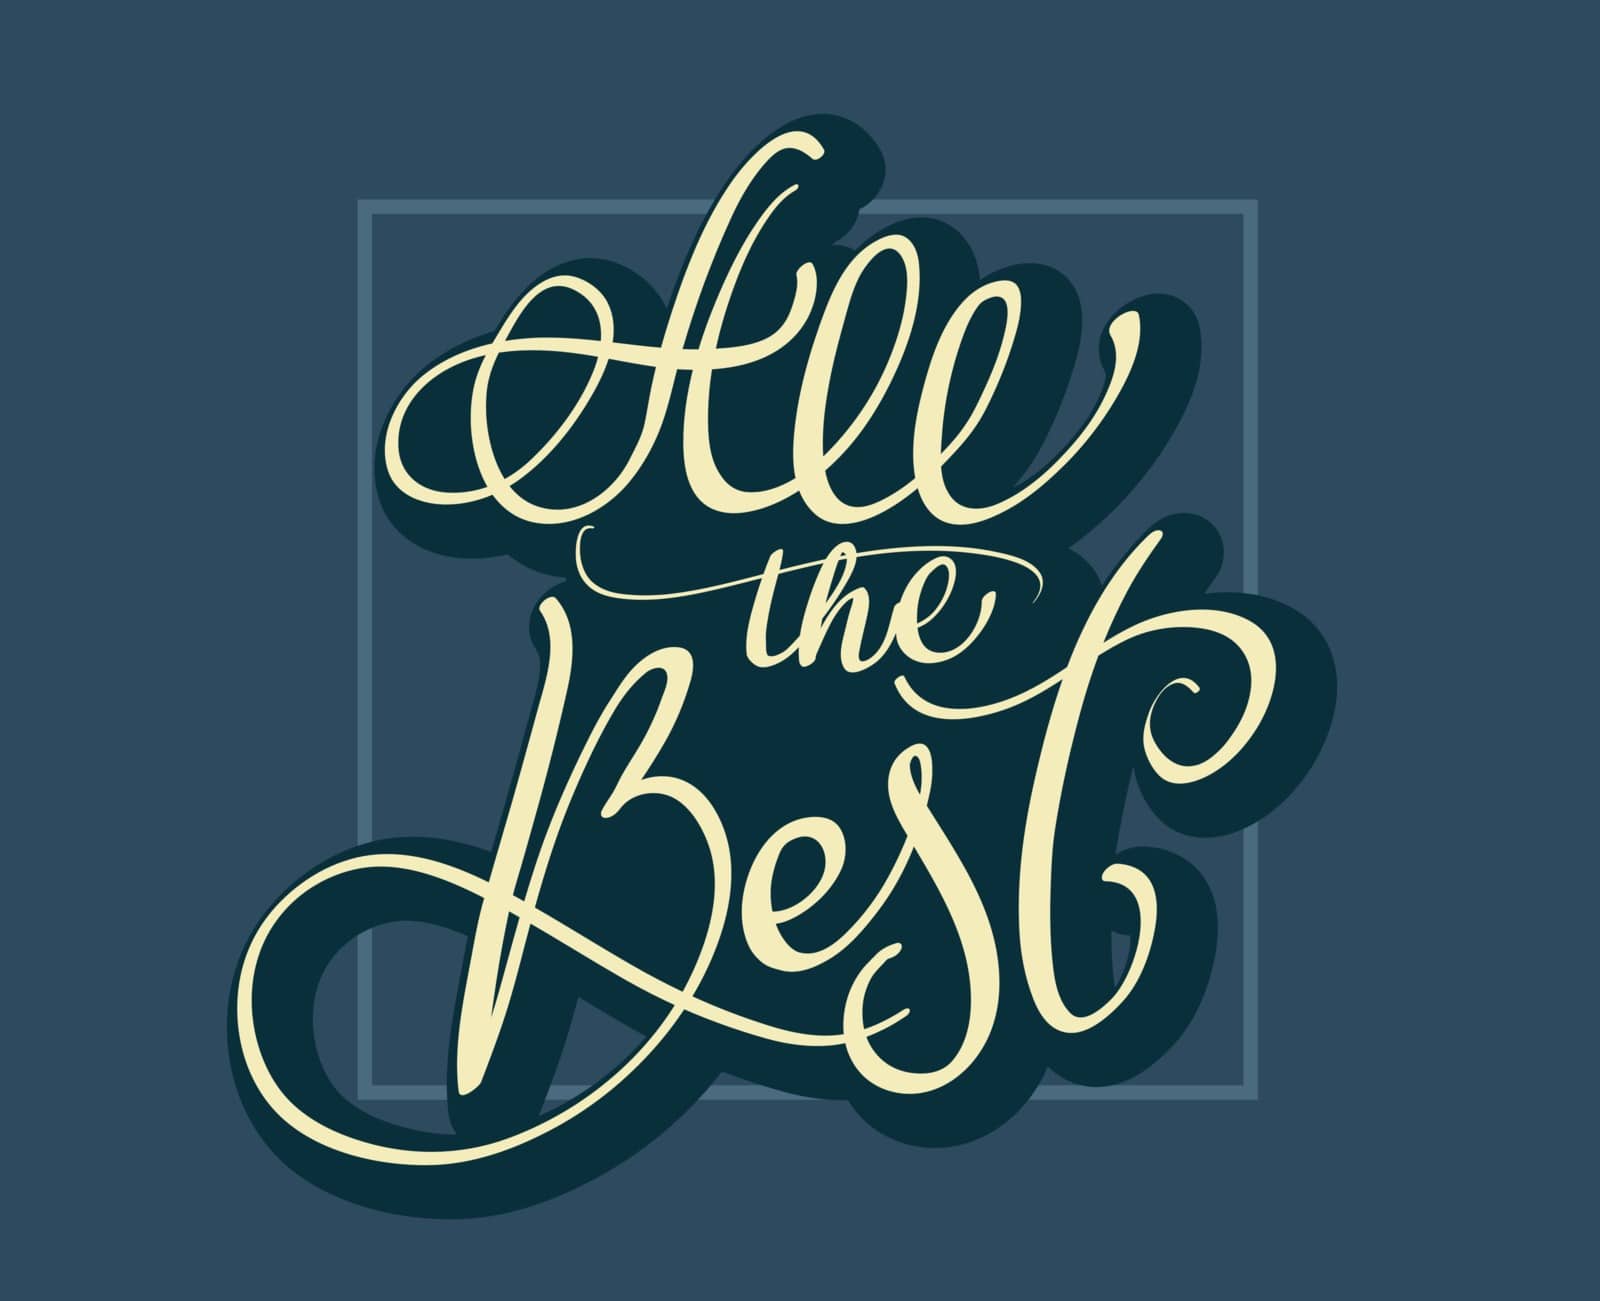 All the Best text on dark blue background. Calligraphy lettering Vector illustration EPS10.